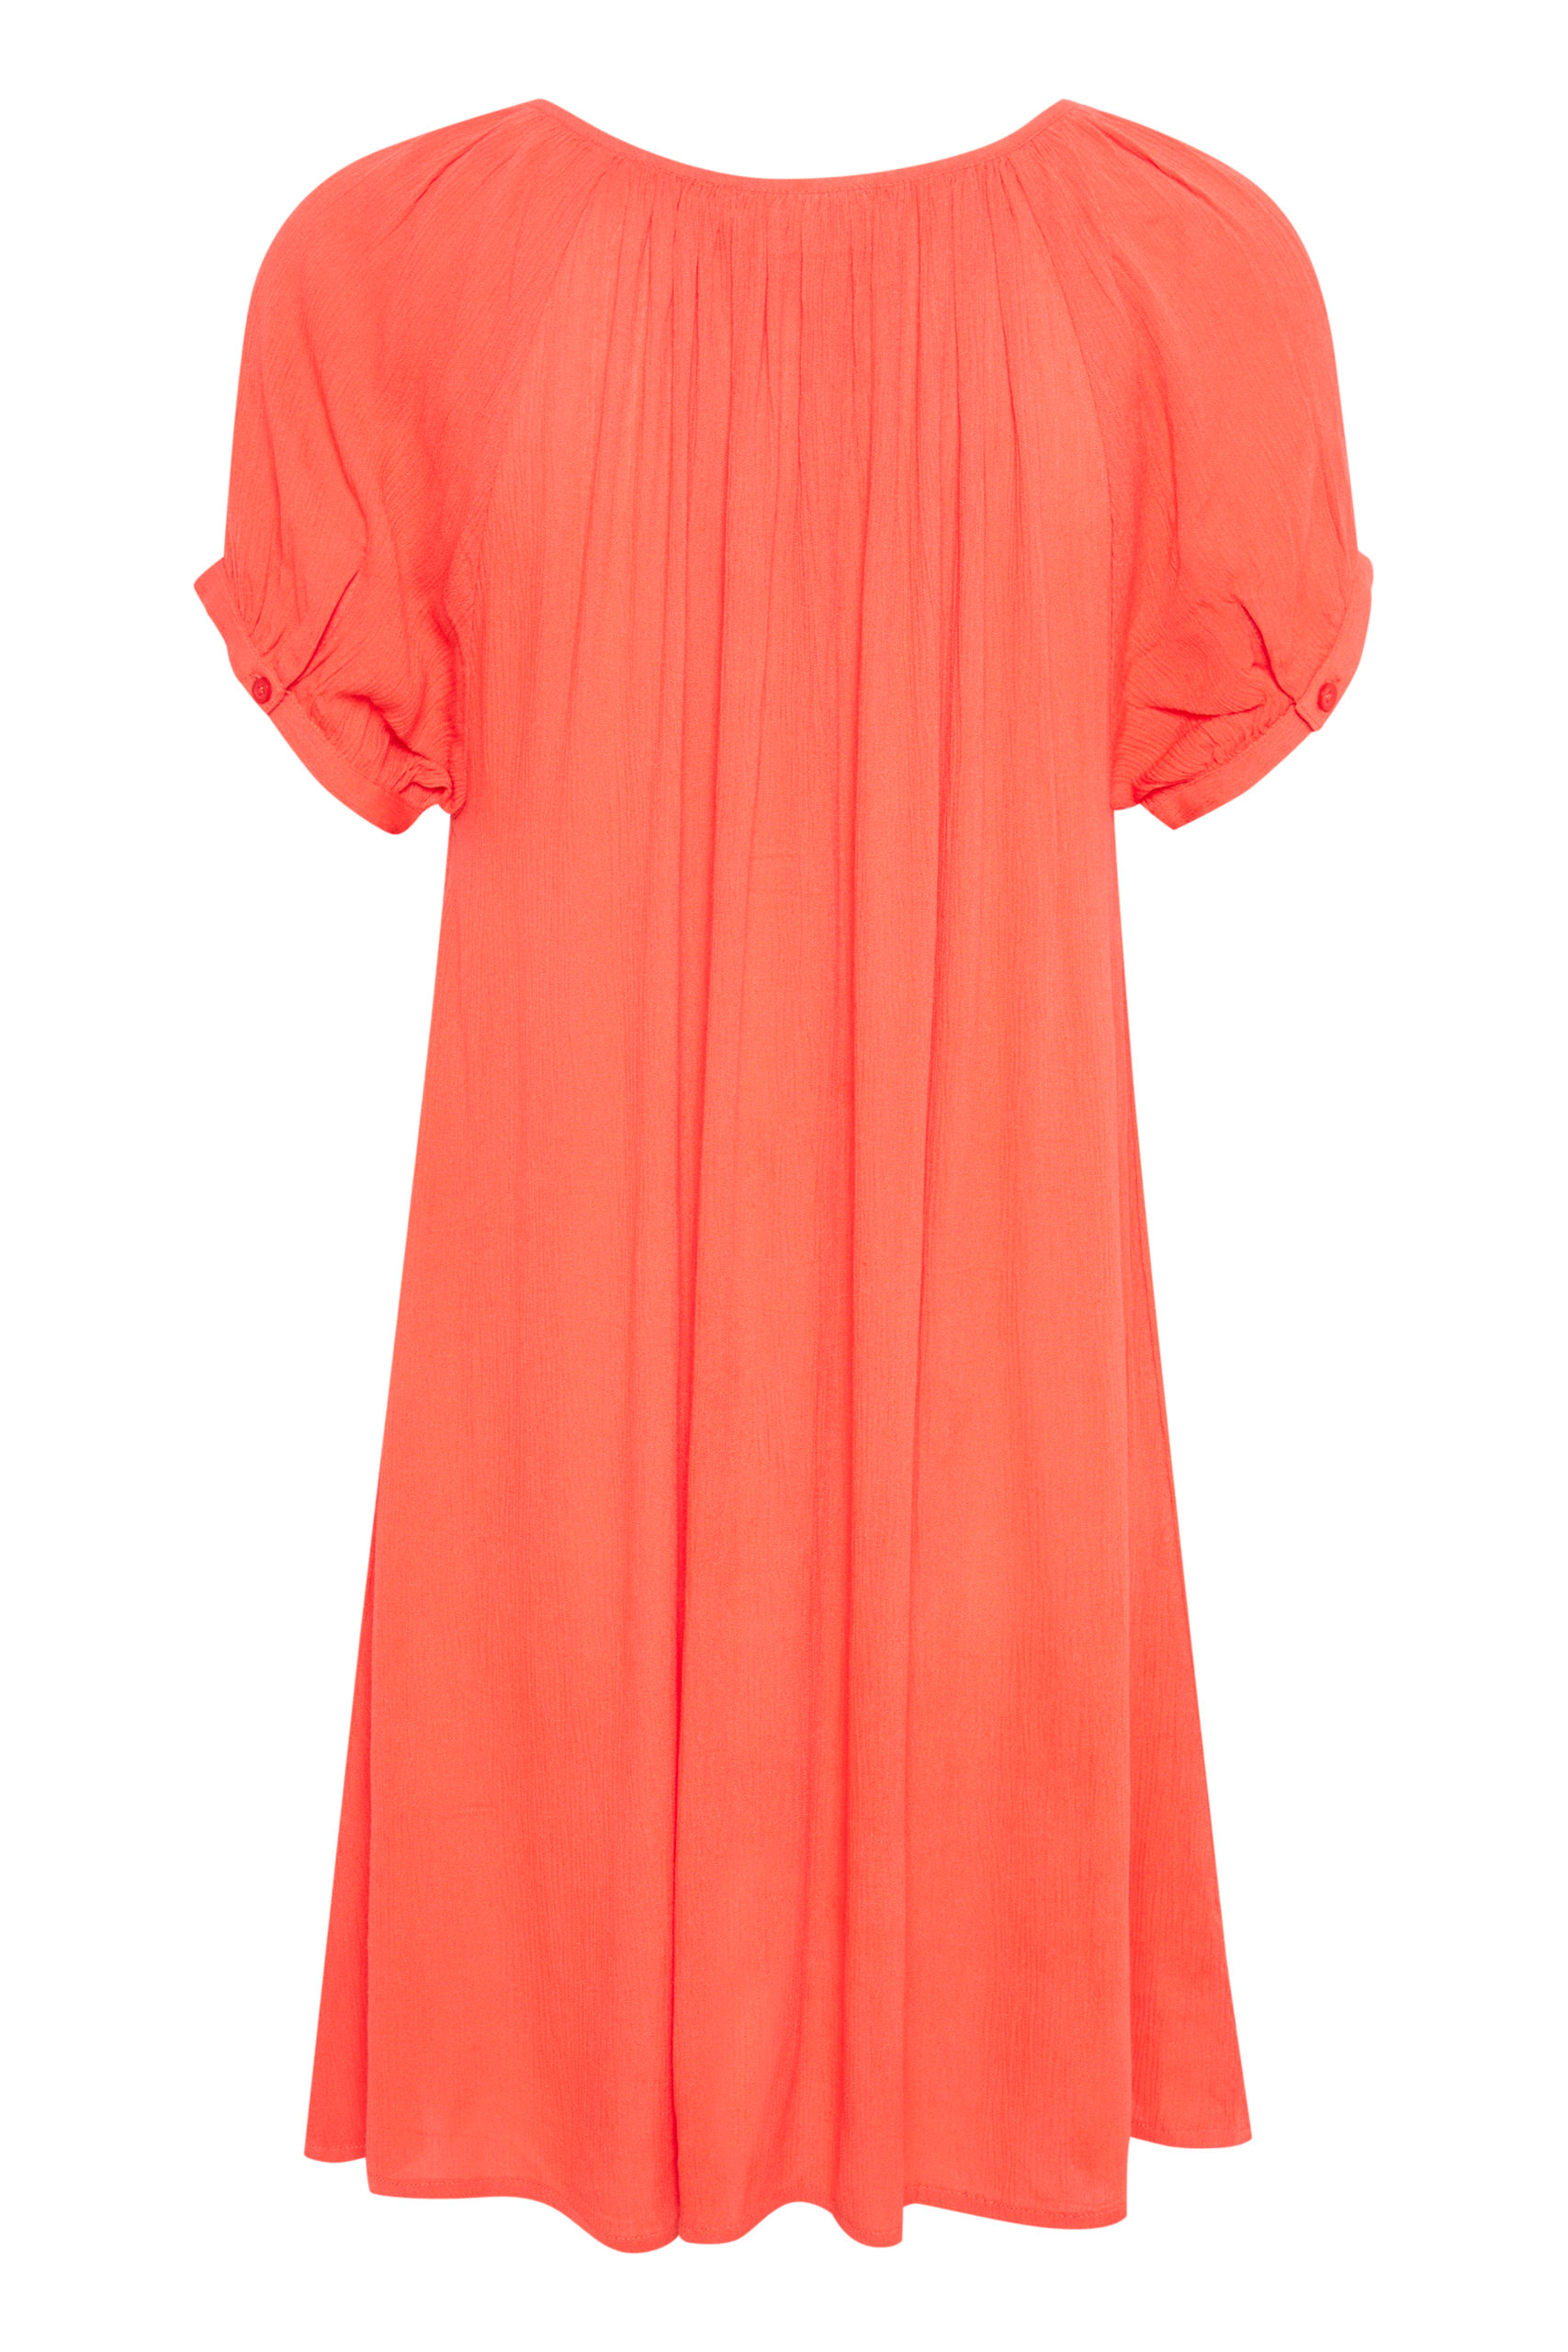 Amber SS Tunic coral item back